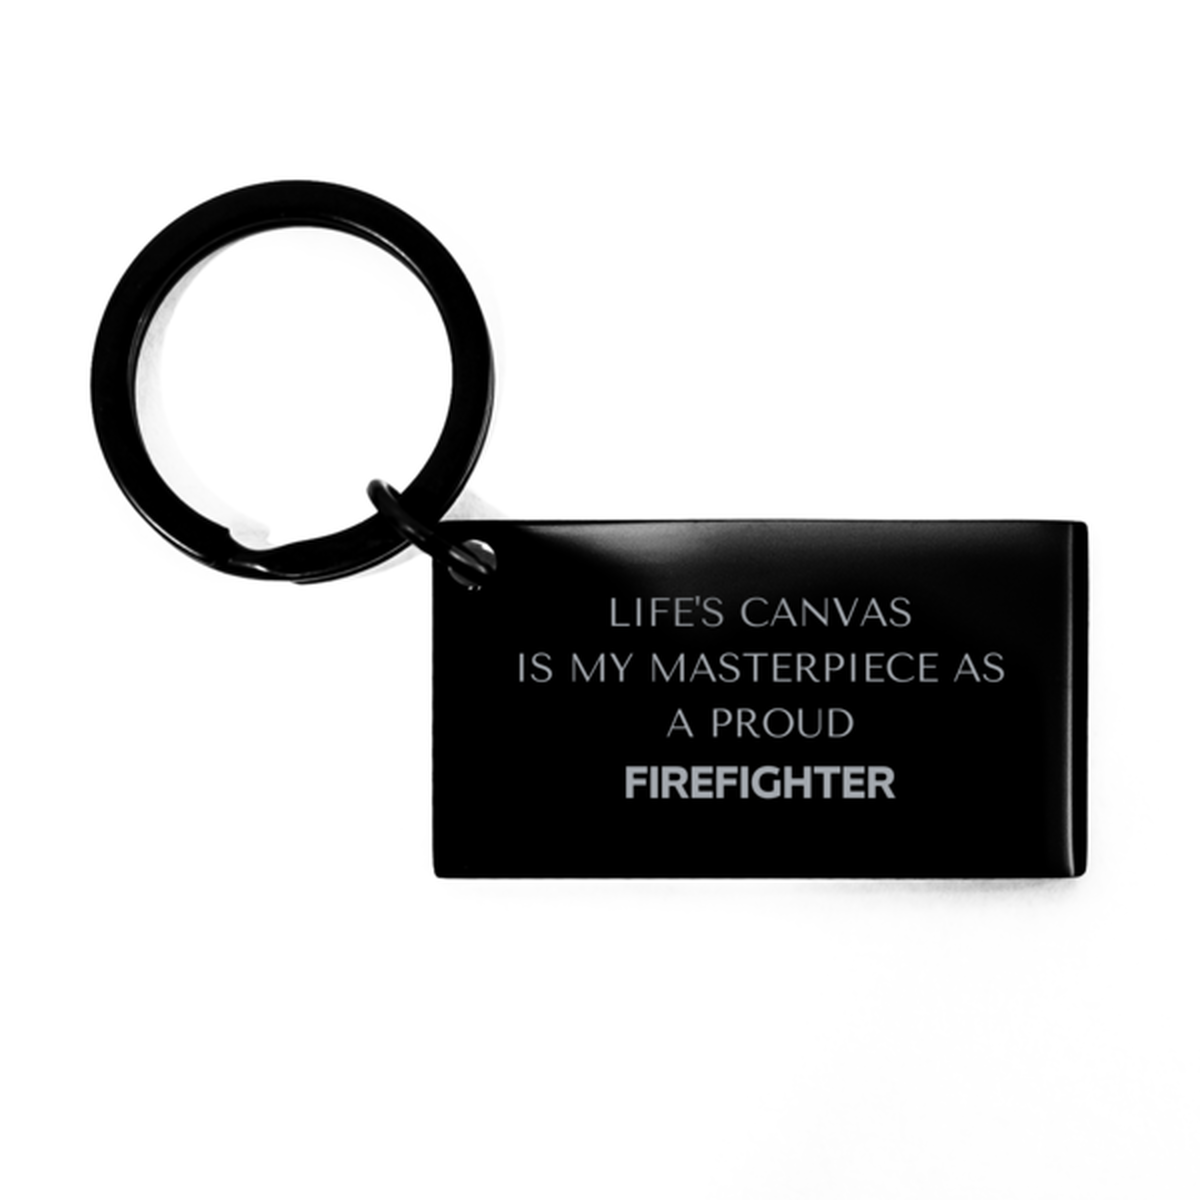 Proud Firefighter Gifts, Life's canvas is my masterpiece, Epic Birthday Christmas Unique Keychain For Firefighter, Coworkers, Men, Women, Friends